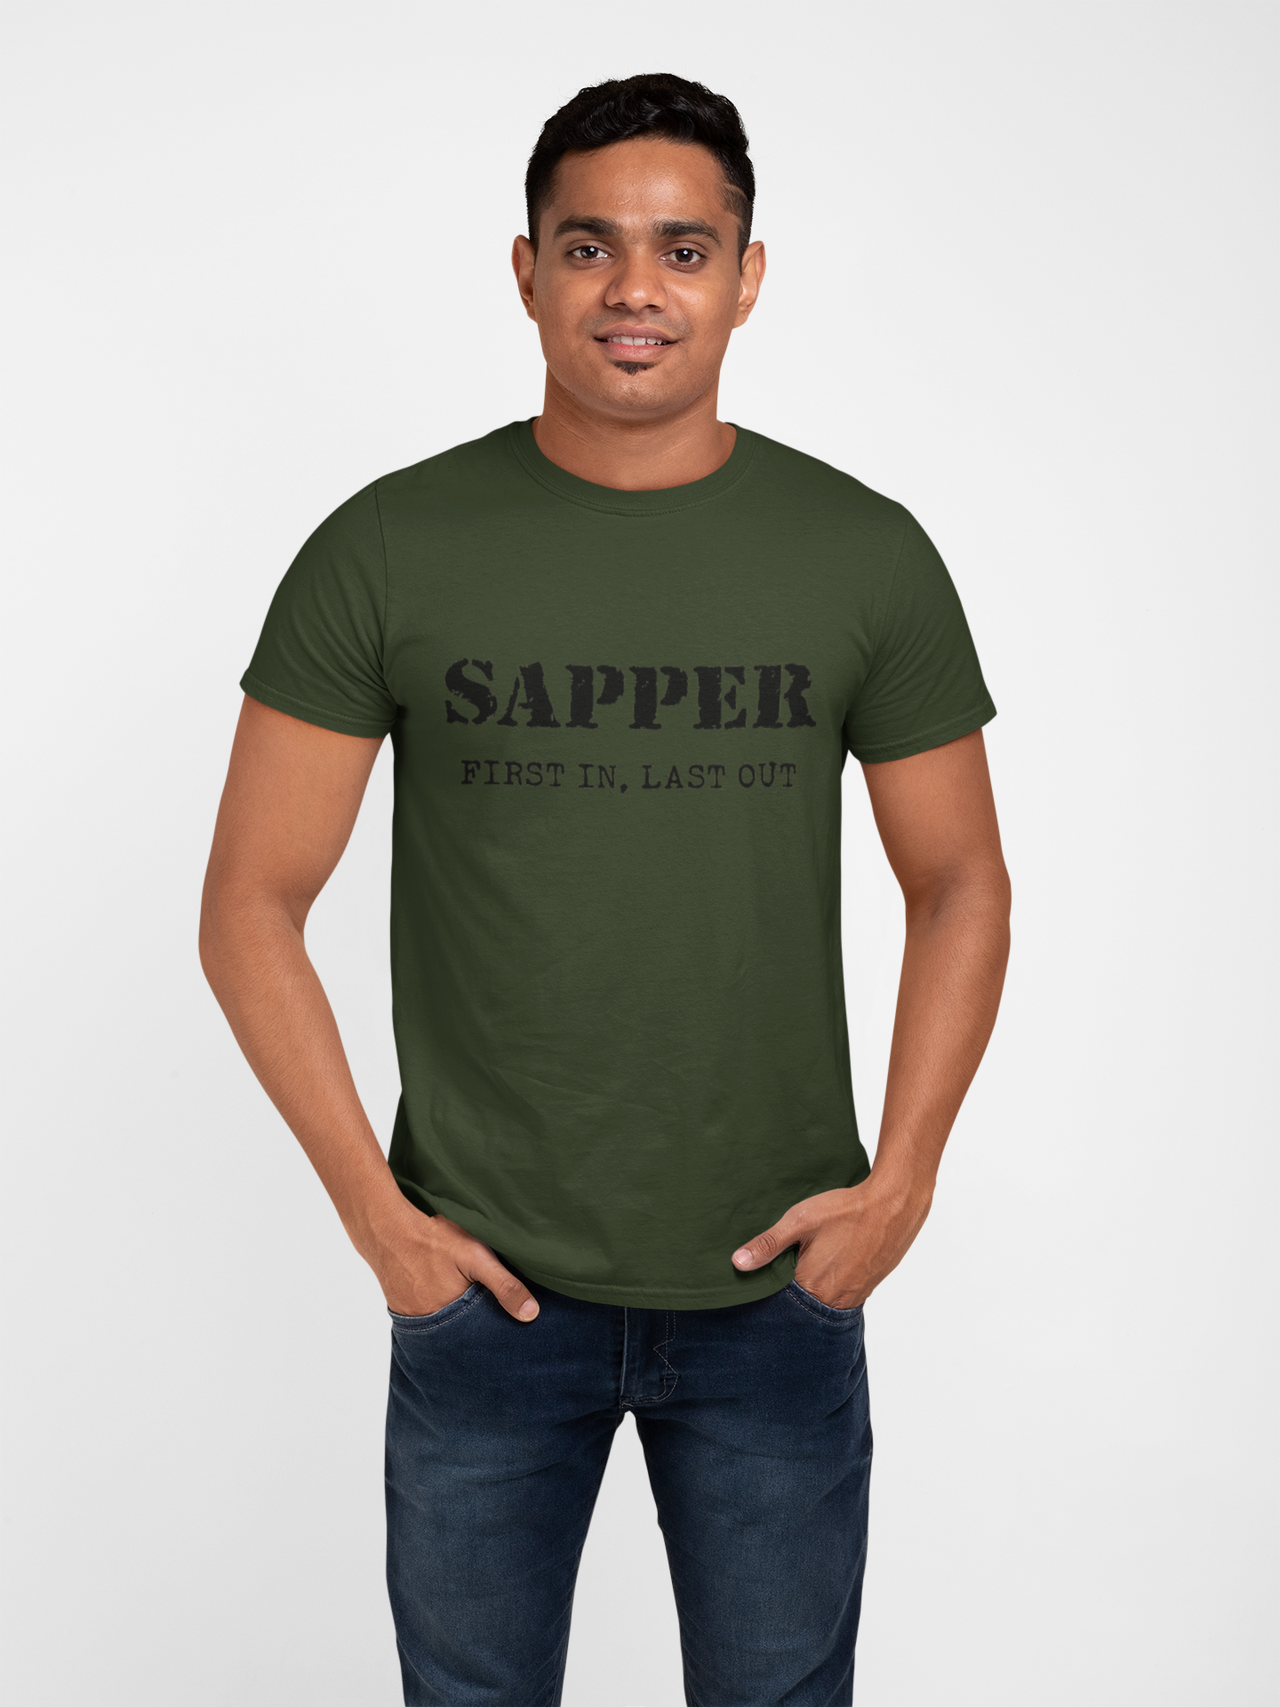 Sapper T-shirt - First In, Last Out (Men)